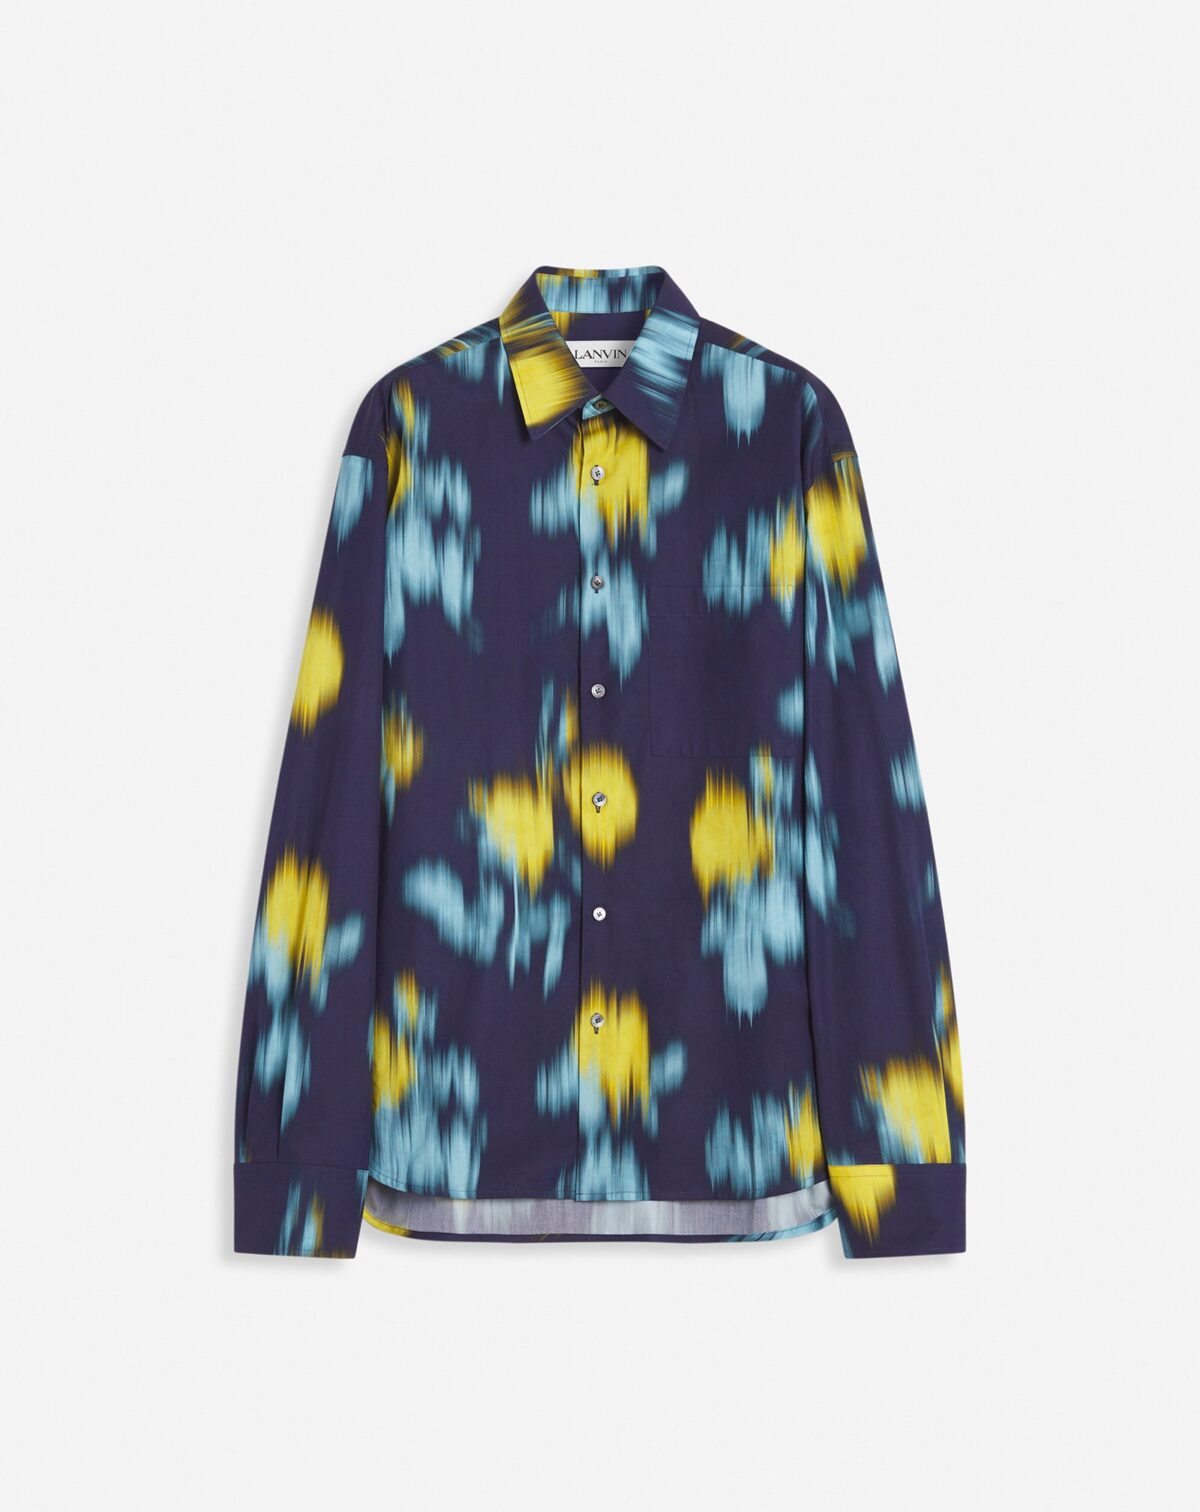 BLURRED FLORAL PRINT LOOSE-FITTING SHIRT